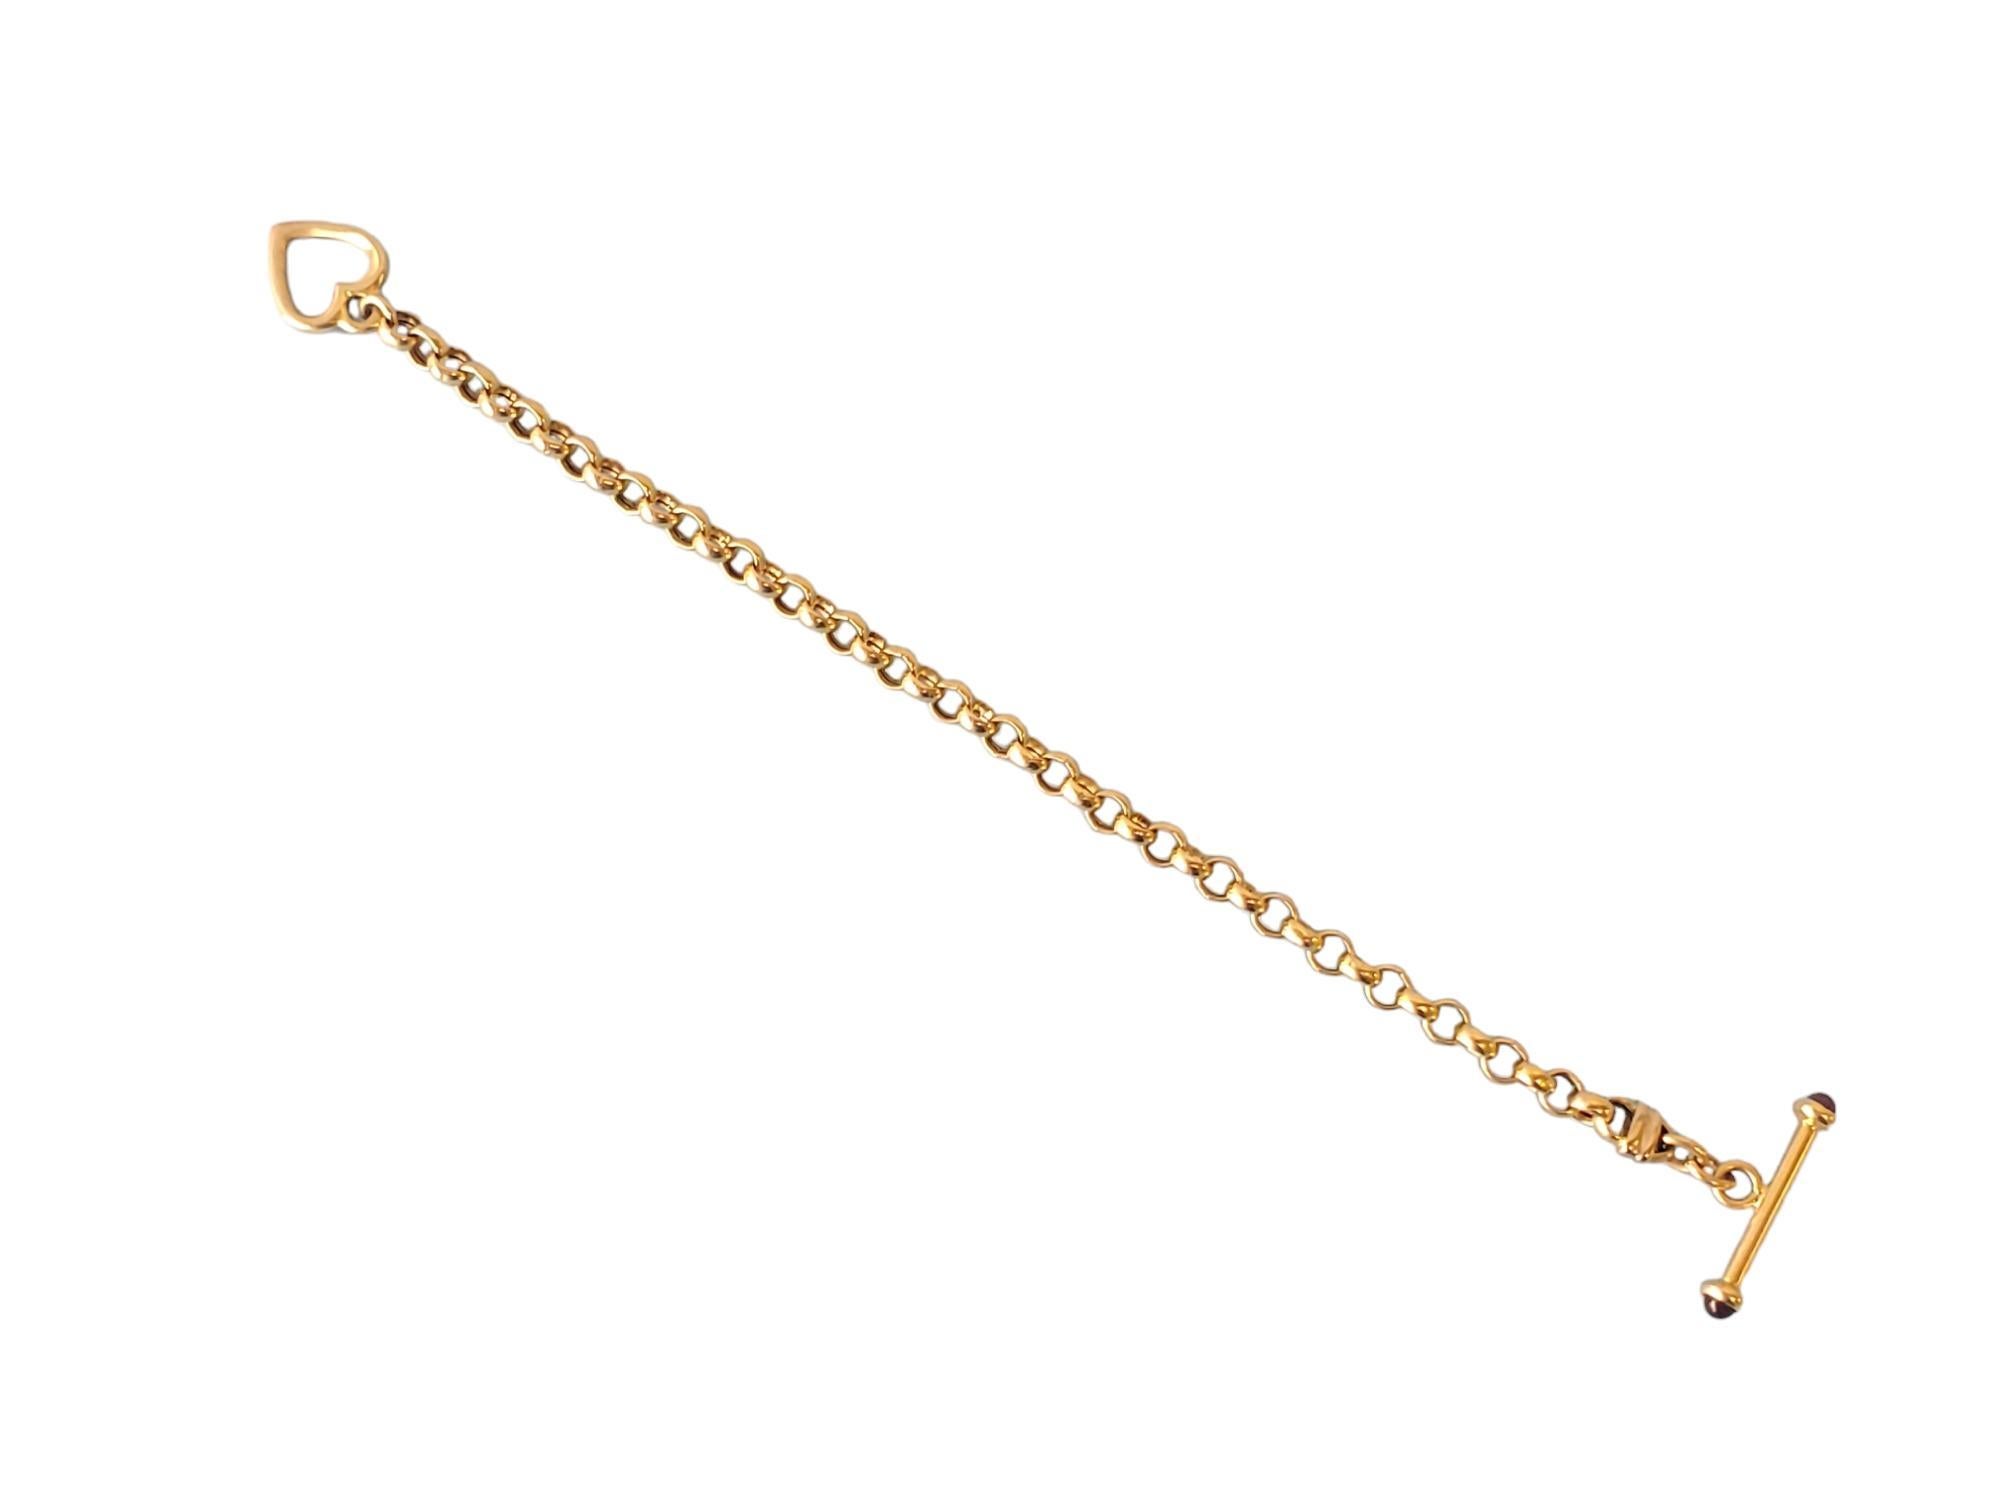 Estate 14k Toggle Bracelet Yellow Gold Link Chain with Heart Lock For Sale 1